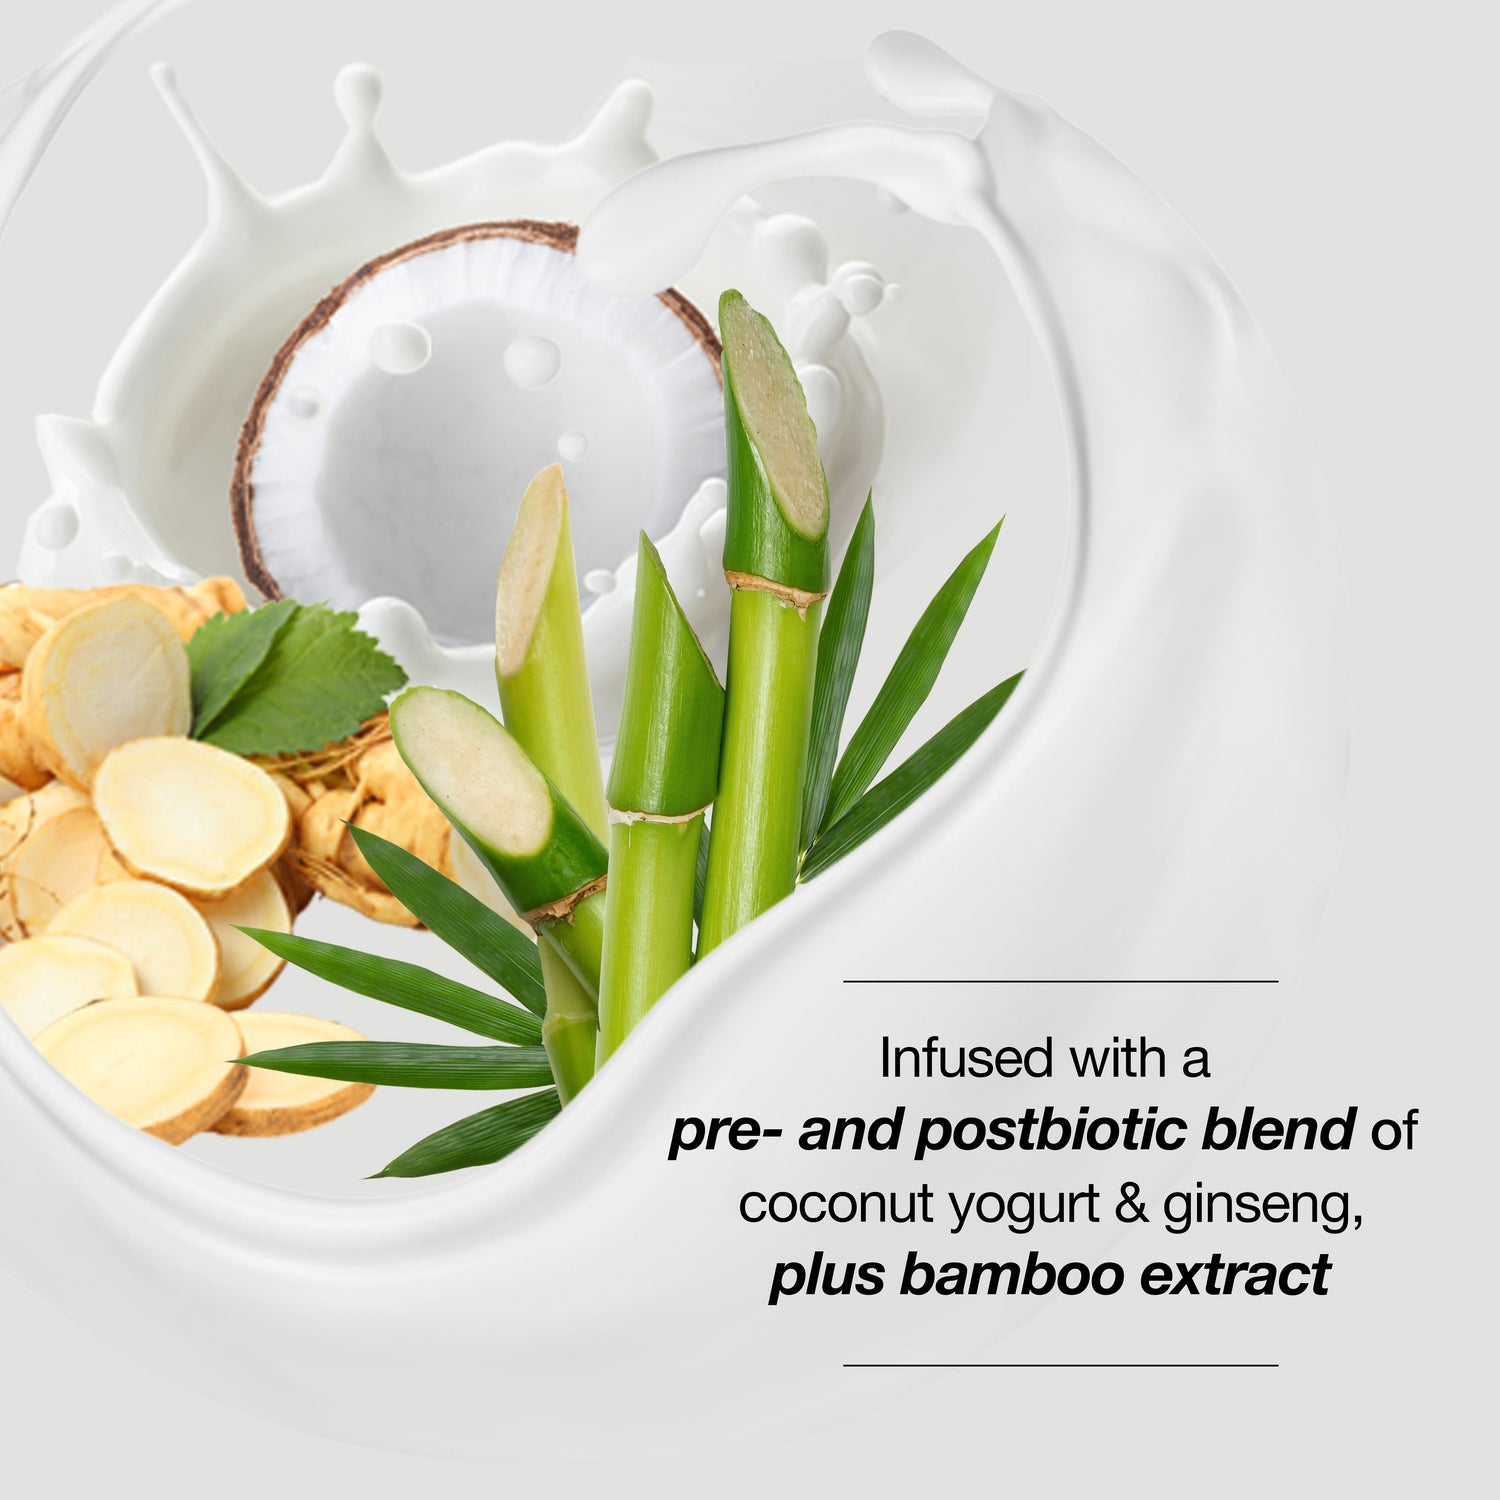 Infused with a pre and postbiotic blend of coconut yogurt and ginseng plus bamboo extract.